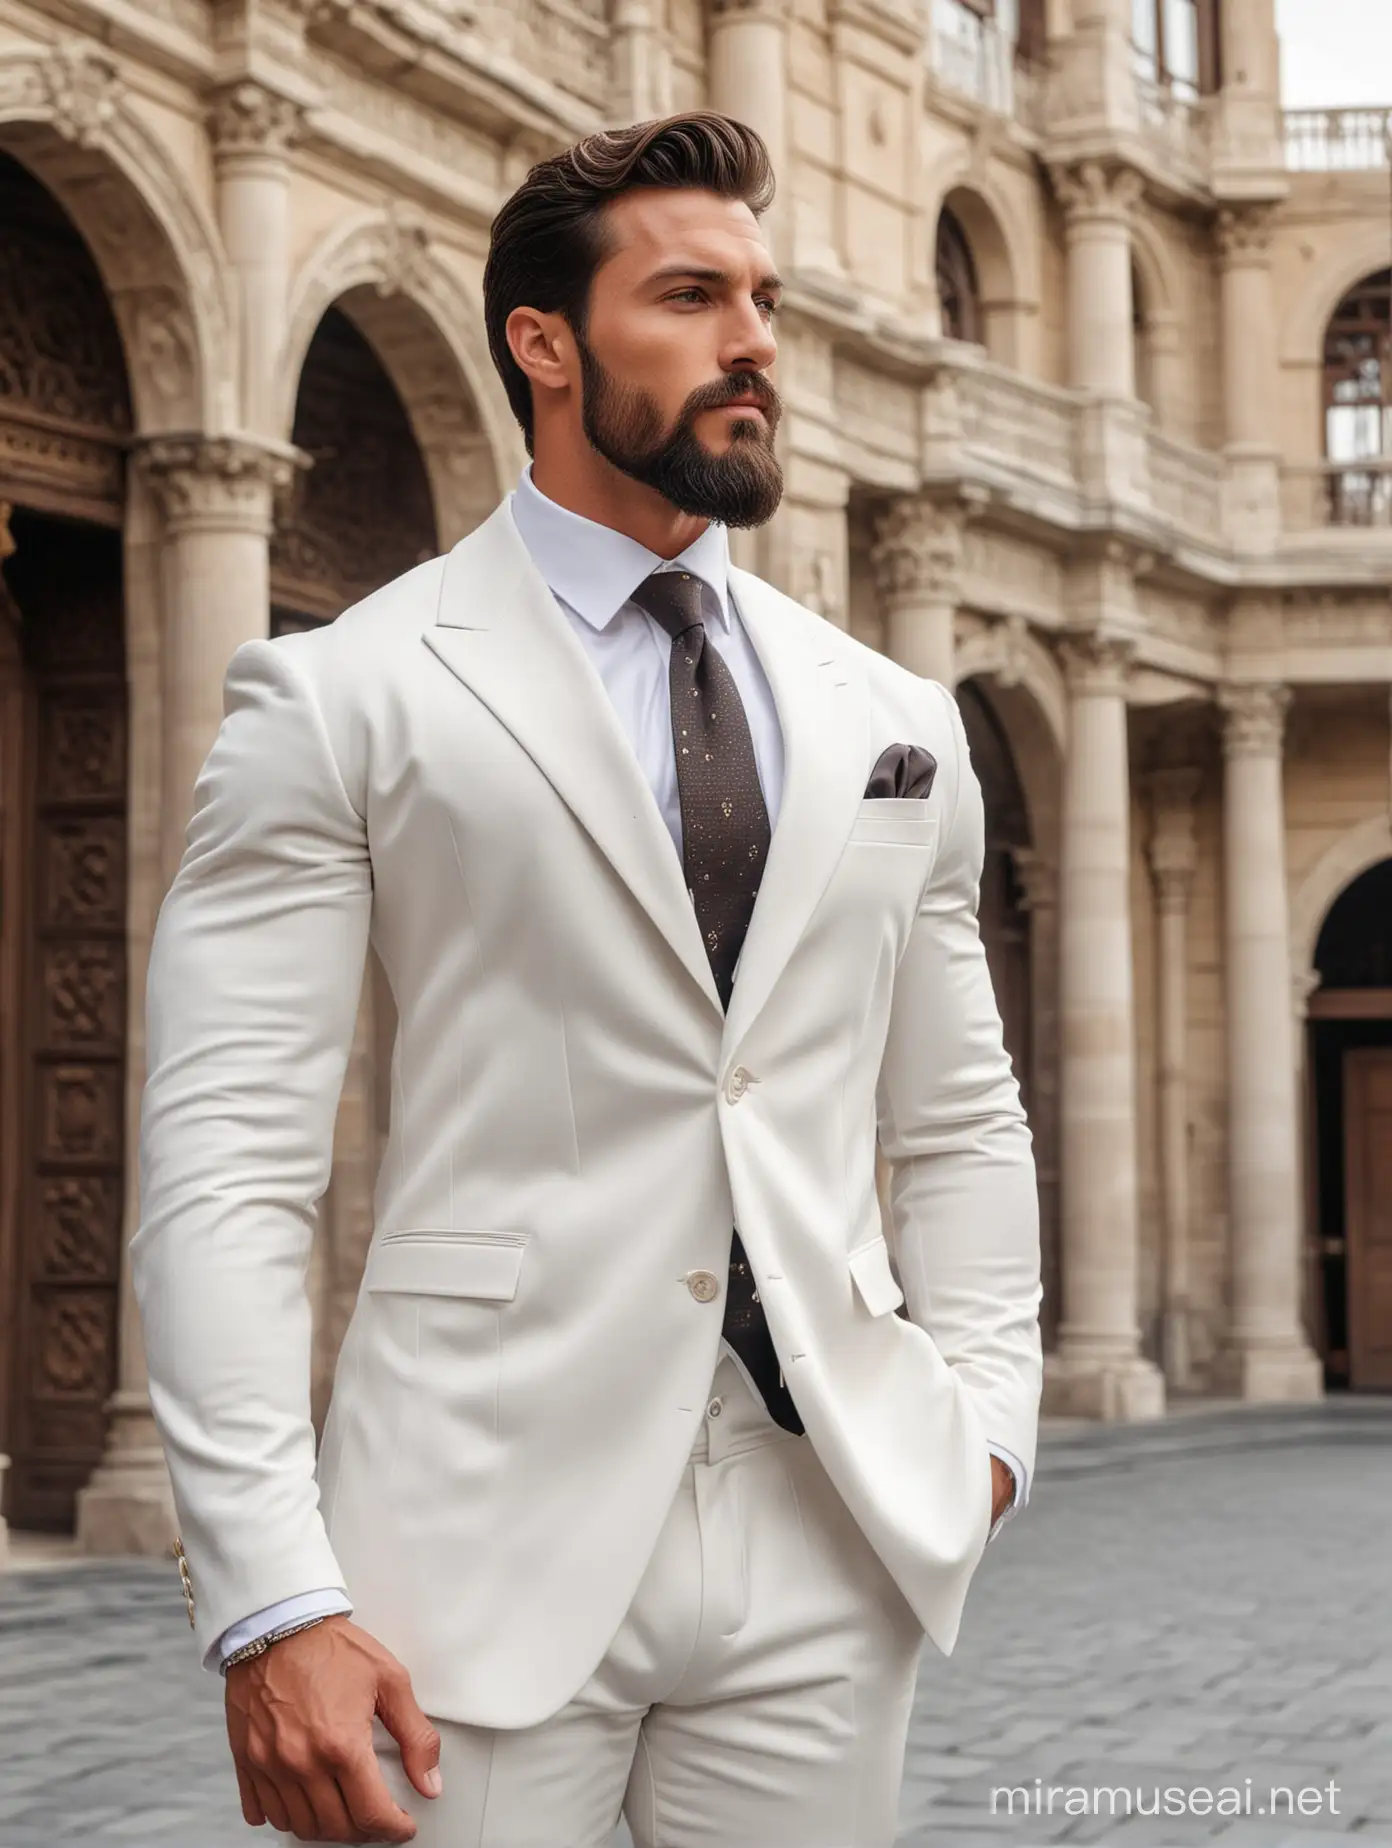 Handsome Bodybuilder Men in White Suit Standing Outside Palace